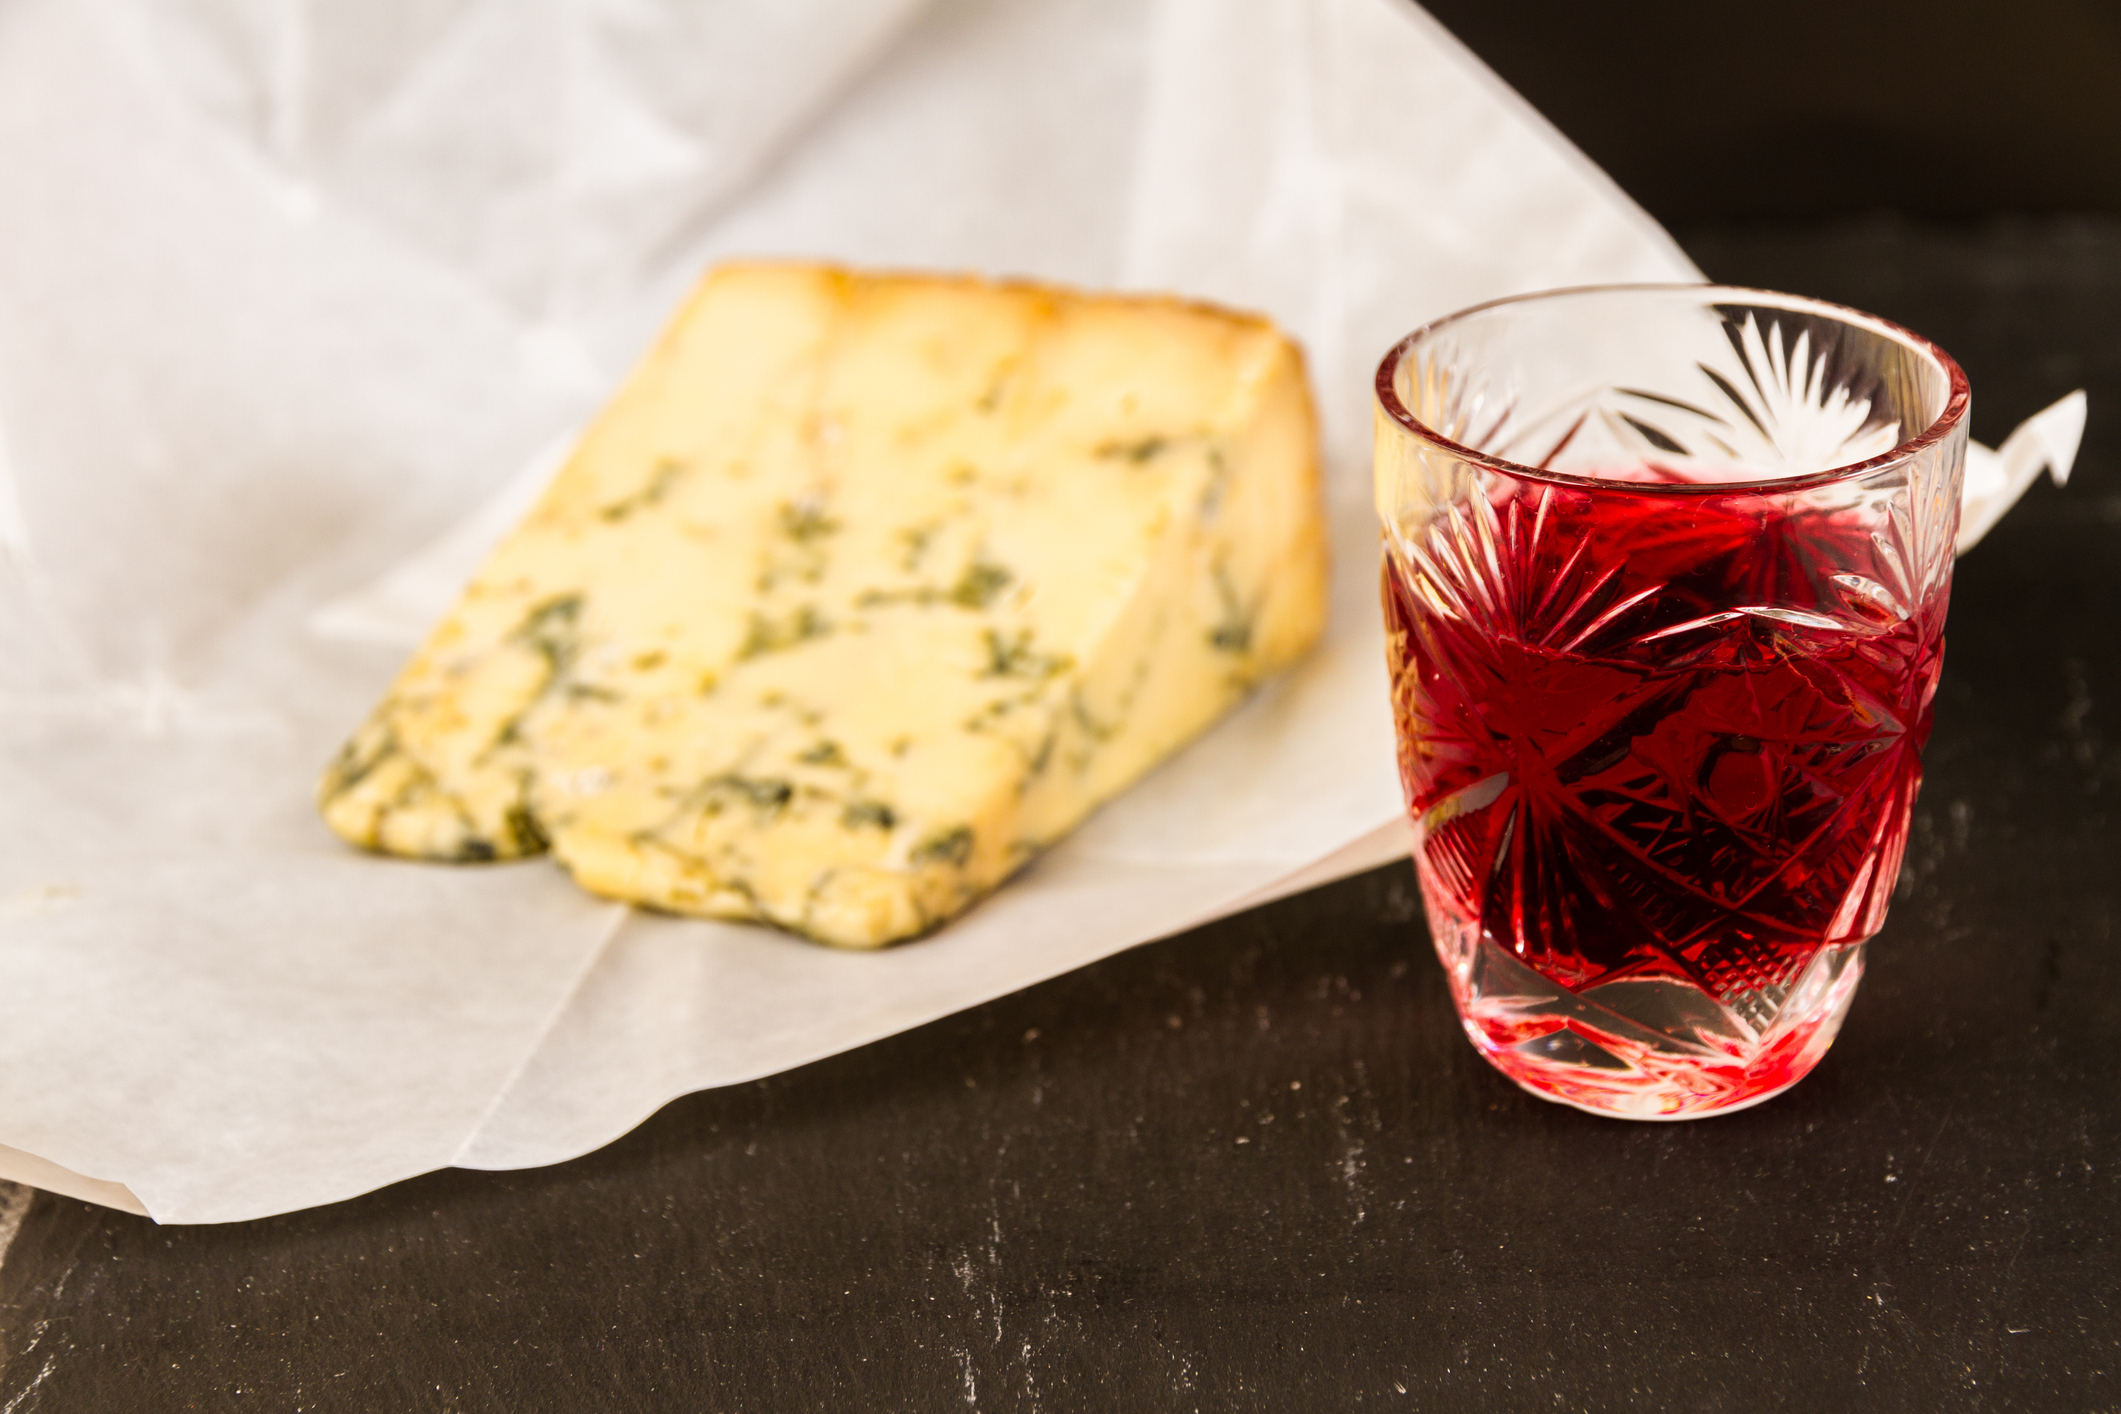 Sloe gin with a wedge of stilton cheese. © Getty